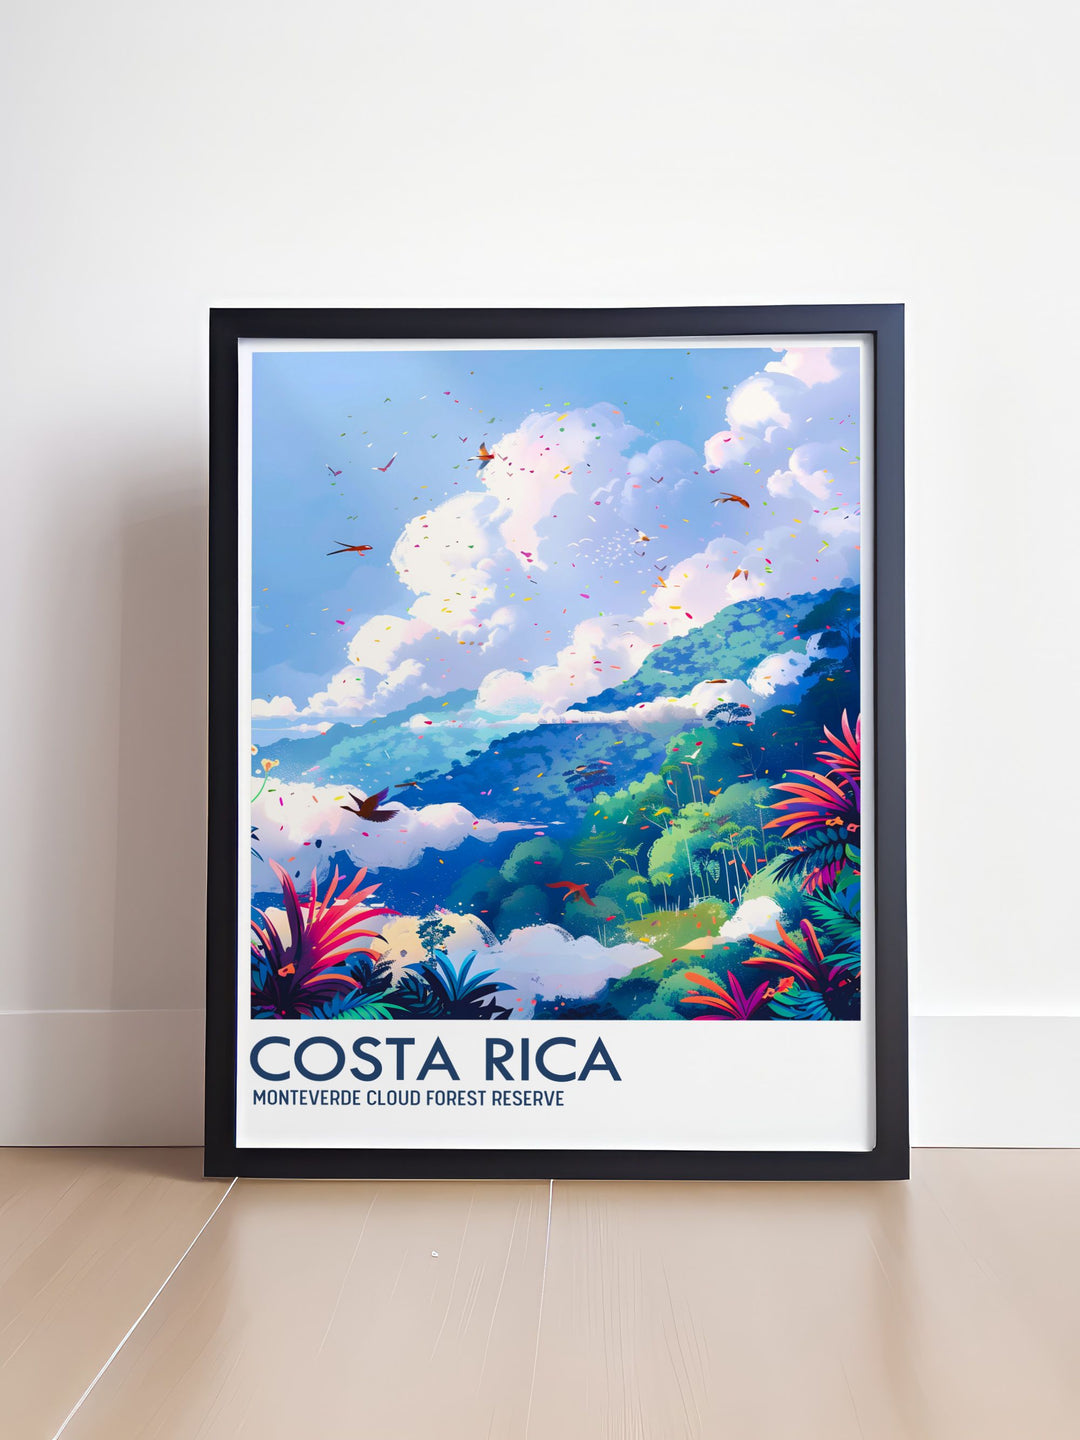 Relive your adventures in Monteverde Cloud Forest Reserve with this stunning travel poster. Featuring the reserves vibrant flora and fauna, this high quality art print captures the essence of Costa Ricas tropical landscapes. Perfect for adding a touch of natural beauty to your home decor or as a gift for nature lovers.